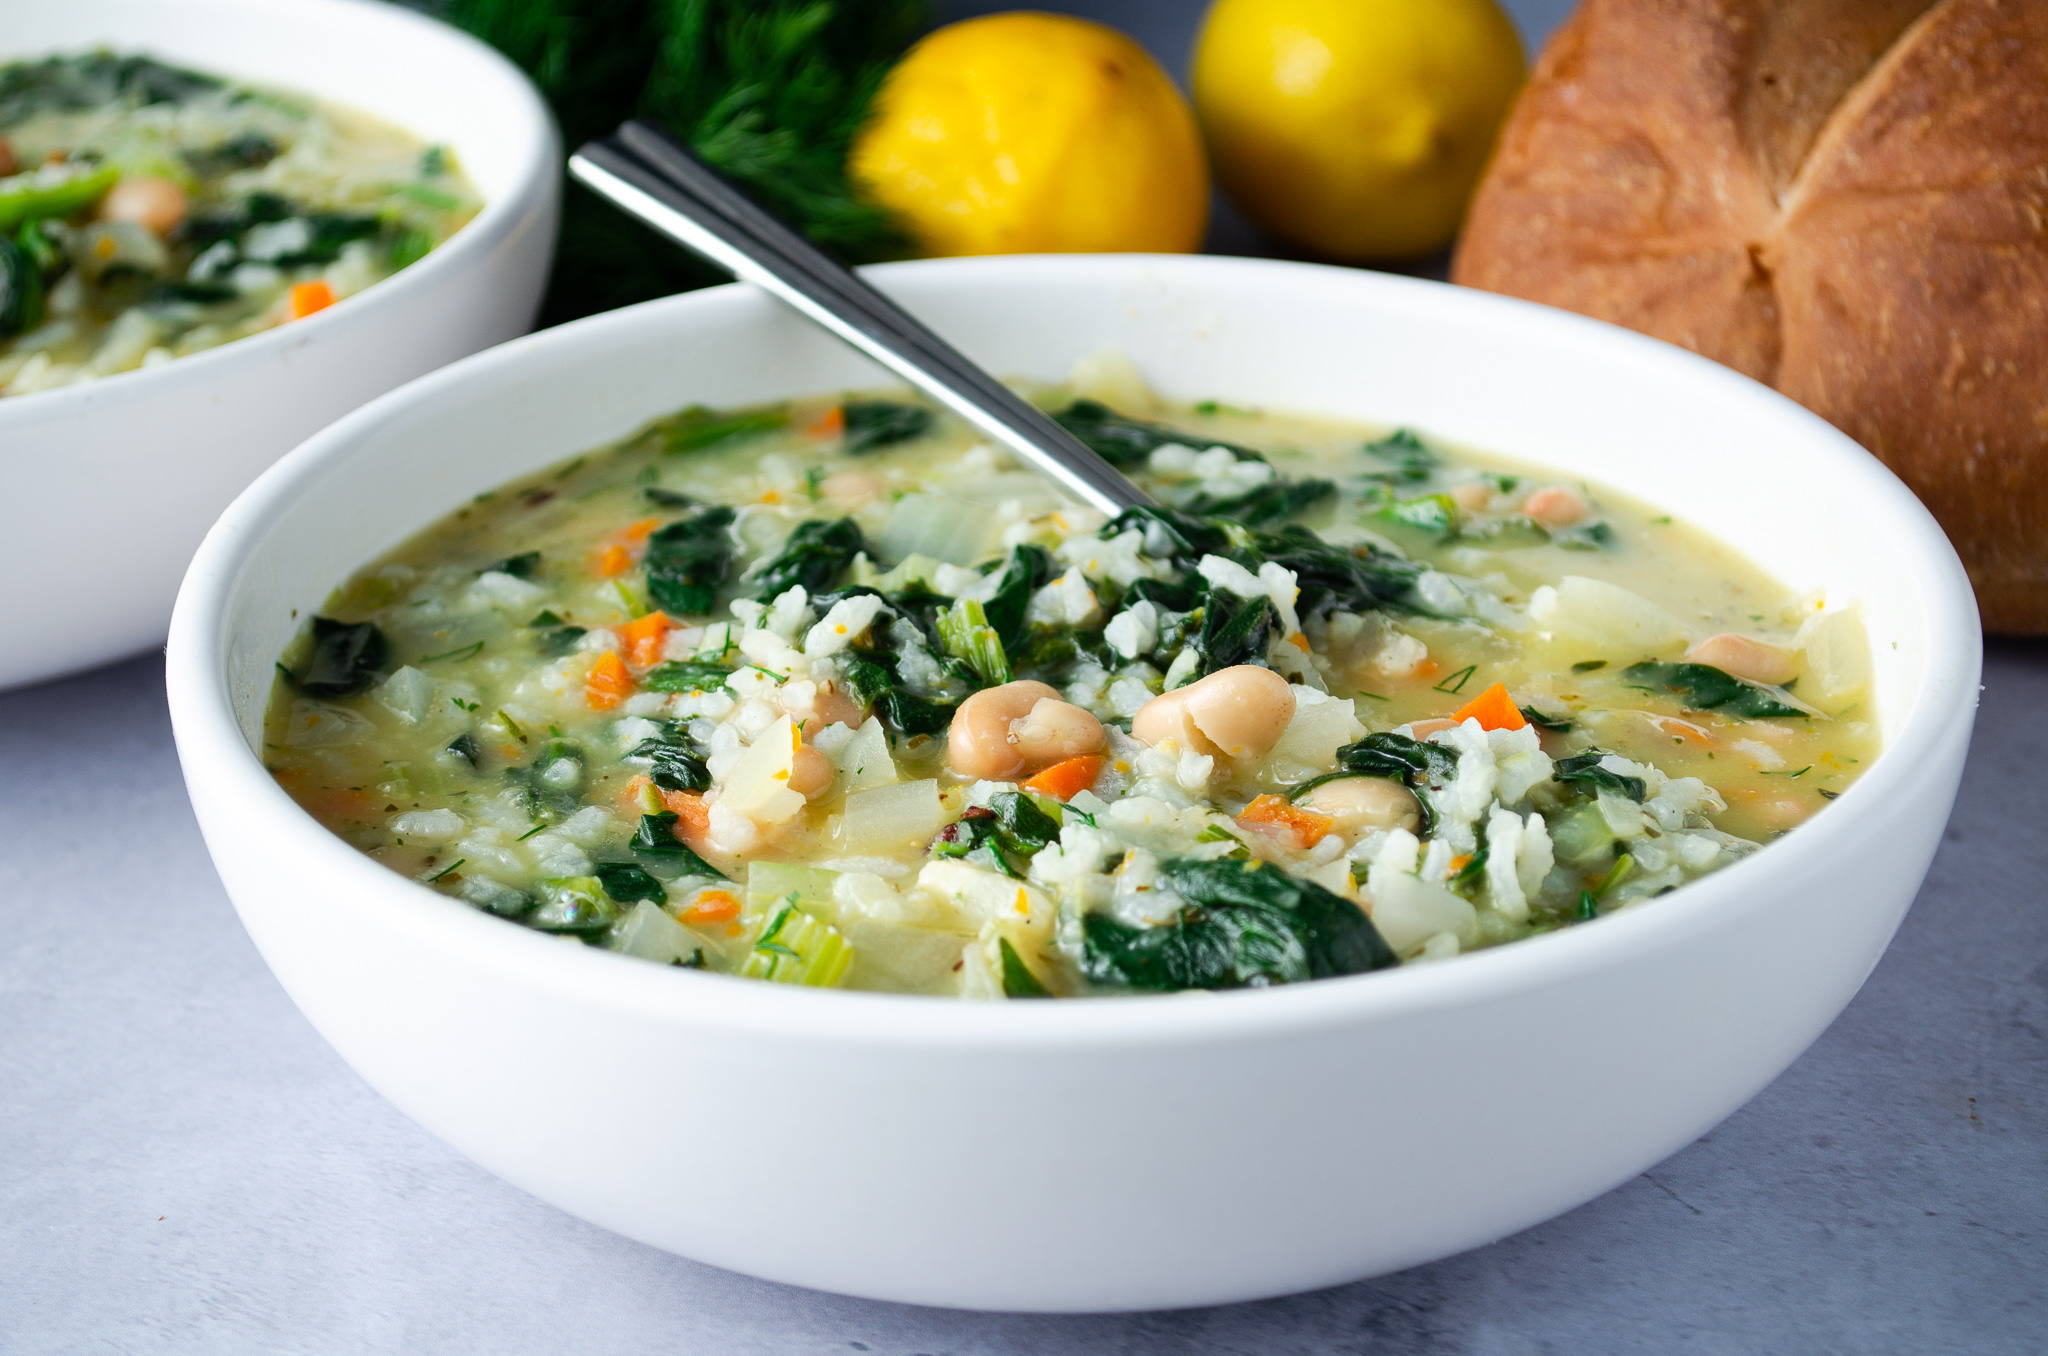 Soup season is every season if you're committed enough, we don't